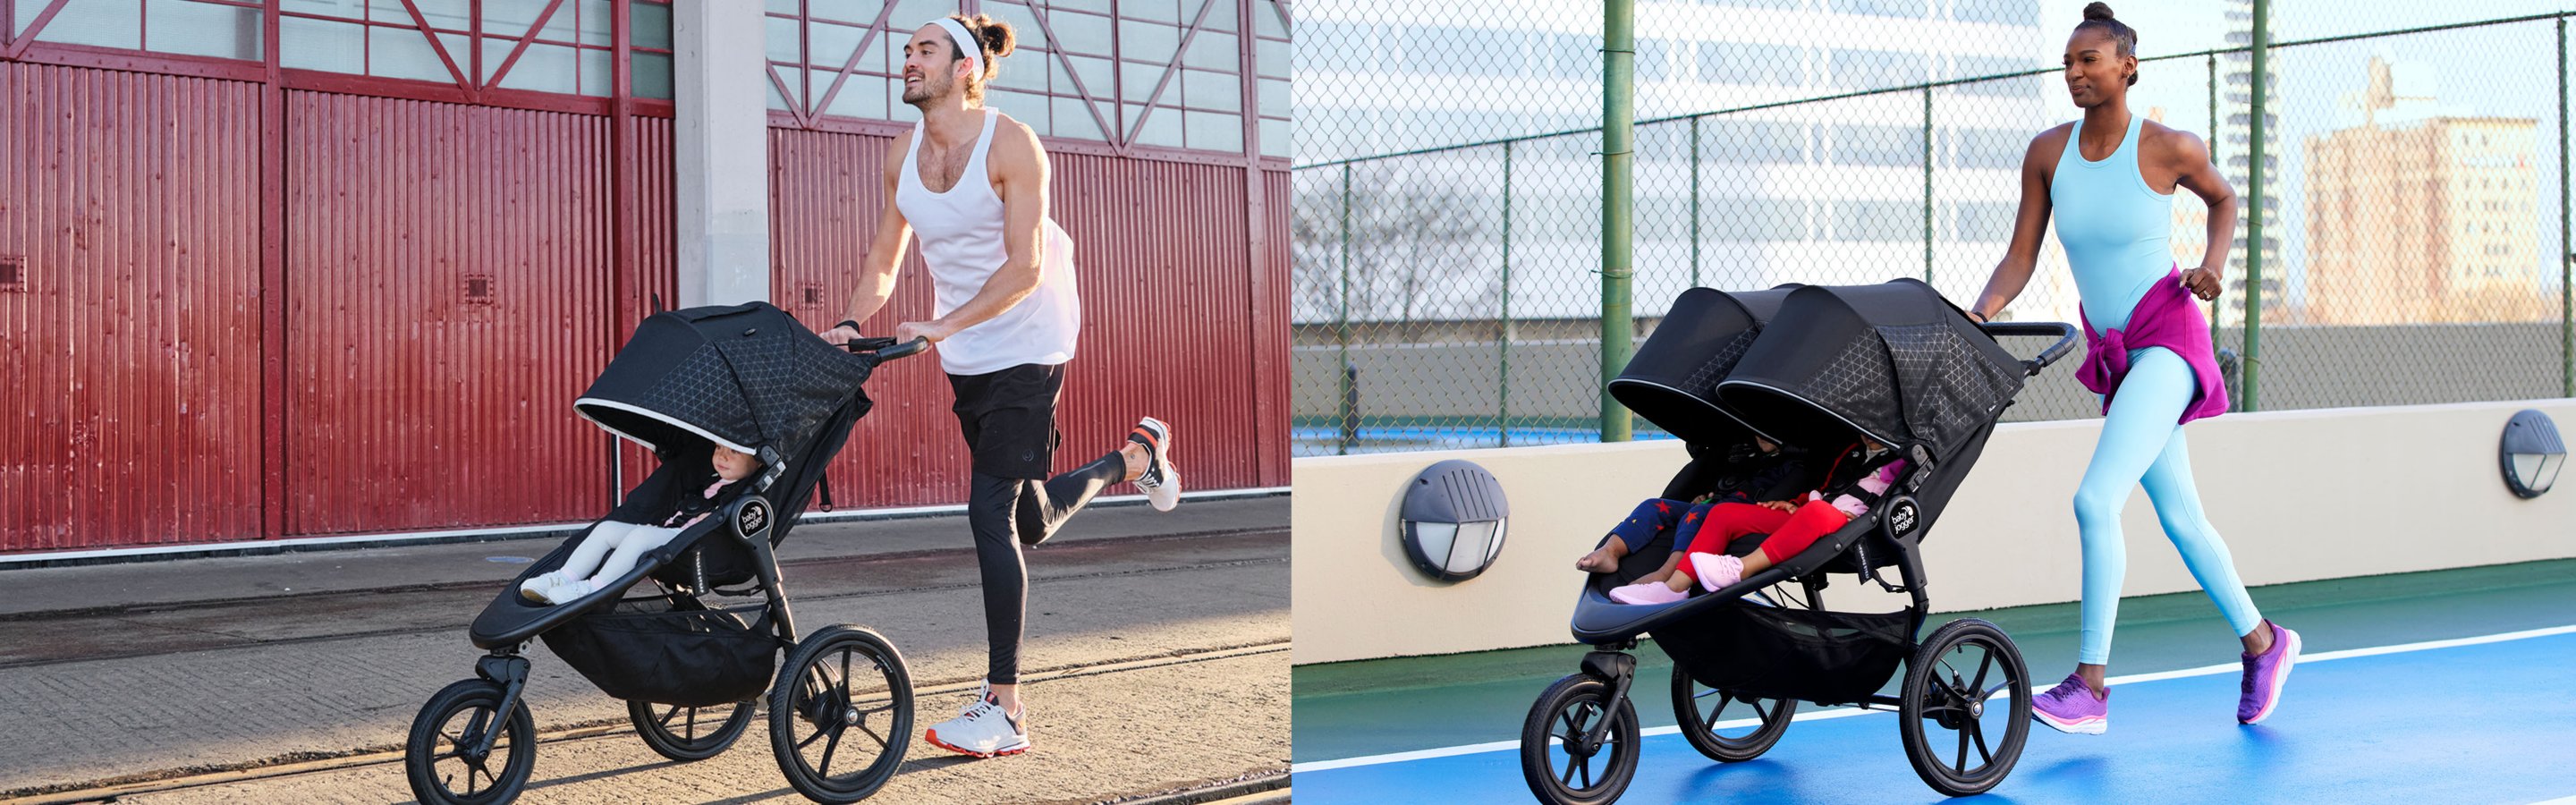 Baby Jogger: Strollers & Gear to Fit Your Life